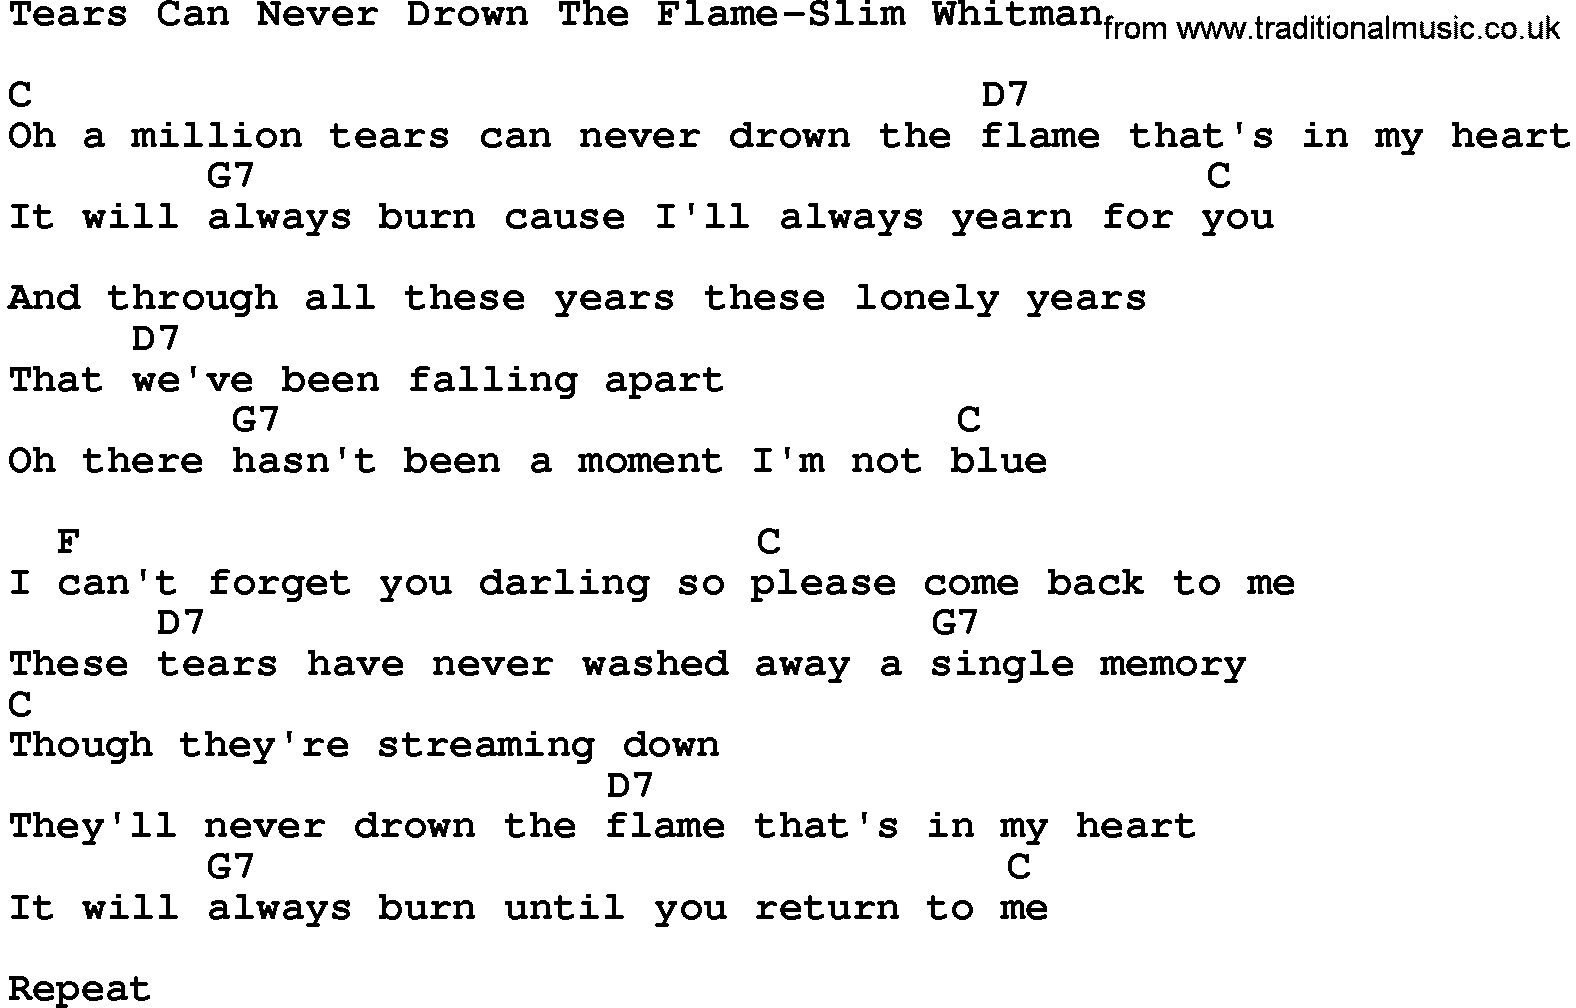 Country music song: Tears Can Never Drown The Flame-Slim Whitman lyrics and chords